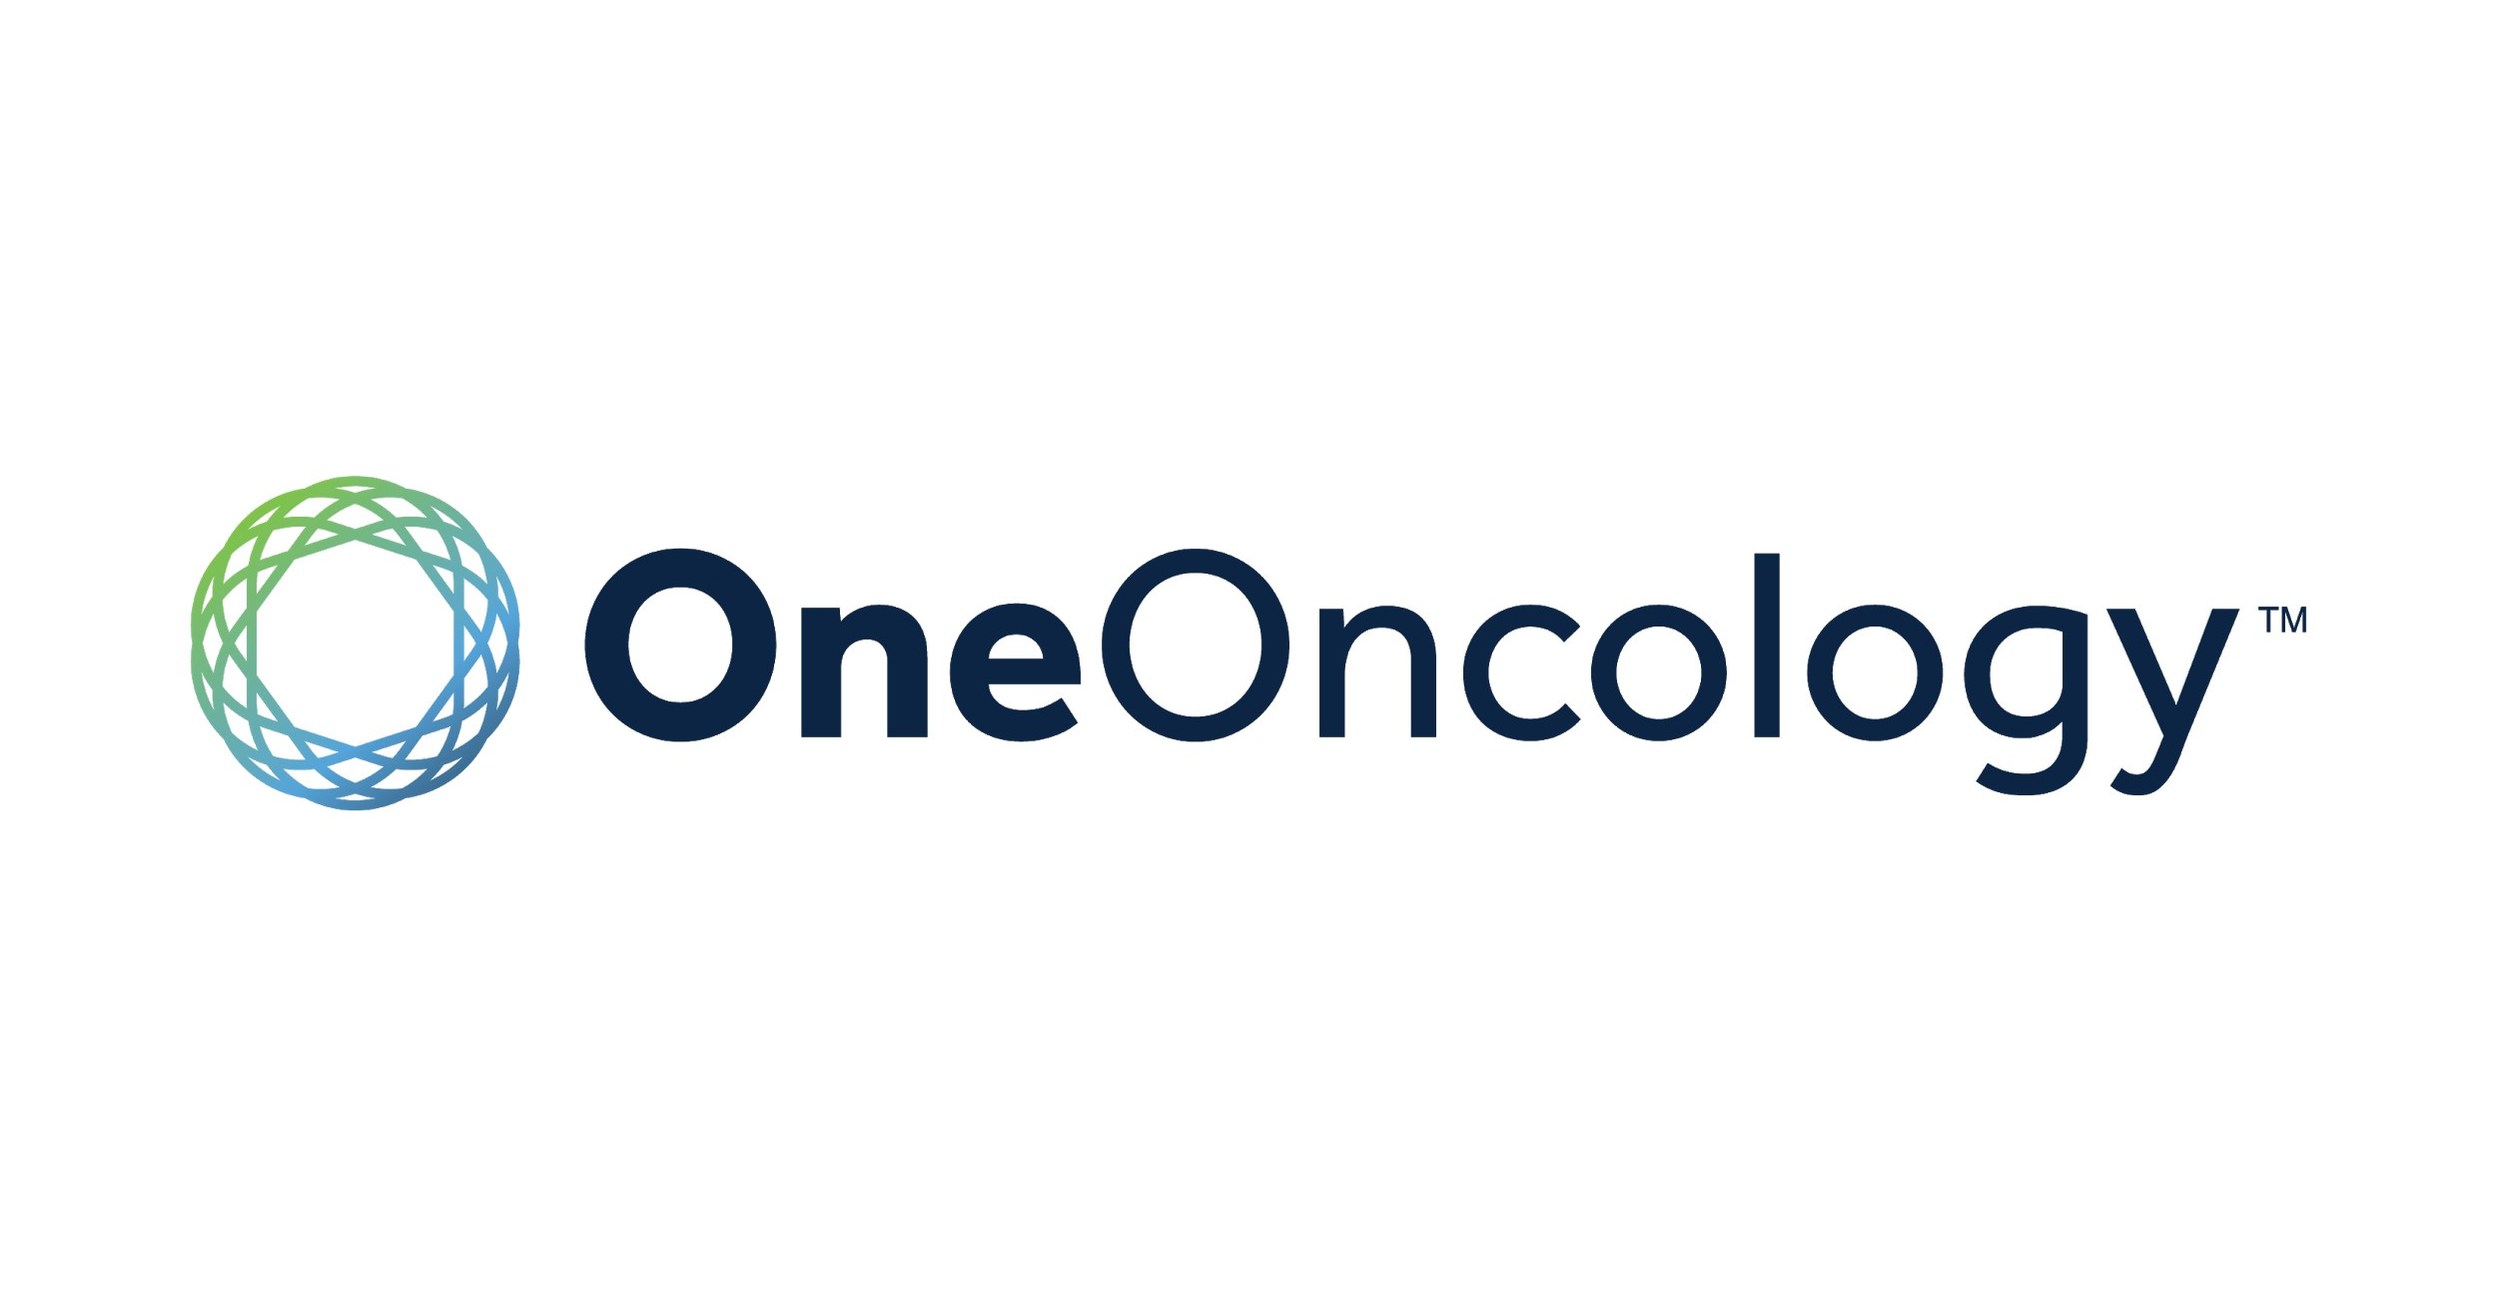 OneOncology Launches to Enable Better Cancer Care in Communities Across